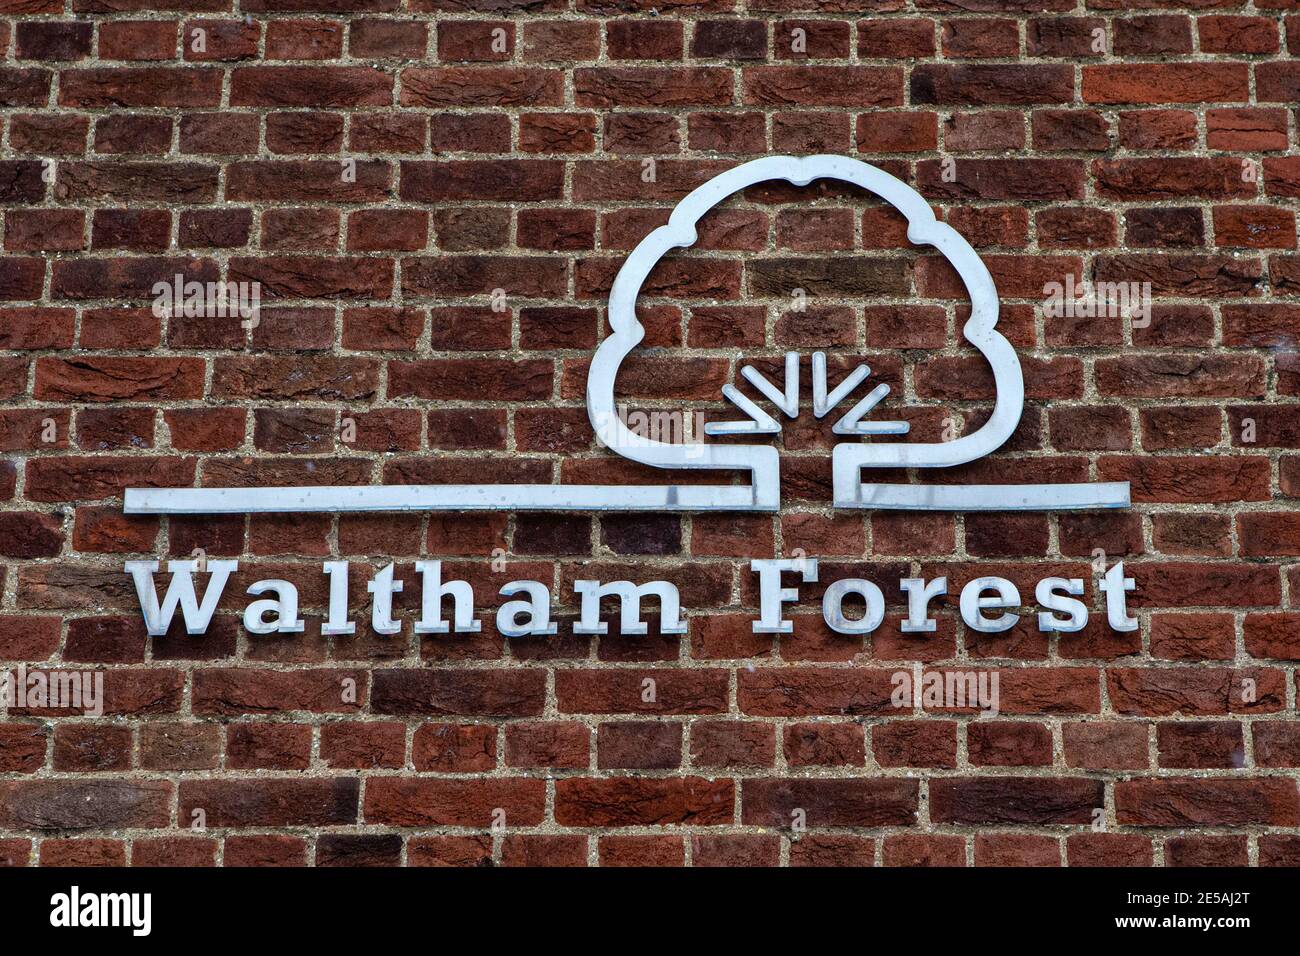 London, UK - January 24th 2021: A London Borough of Waltham Forest sign on the exterior of a Library in Chingford, London, UK. Stock Photo